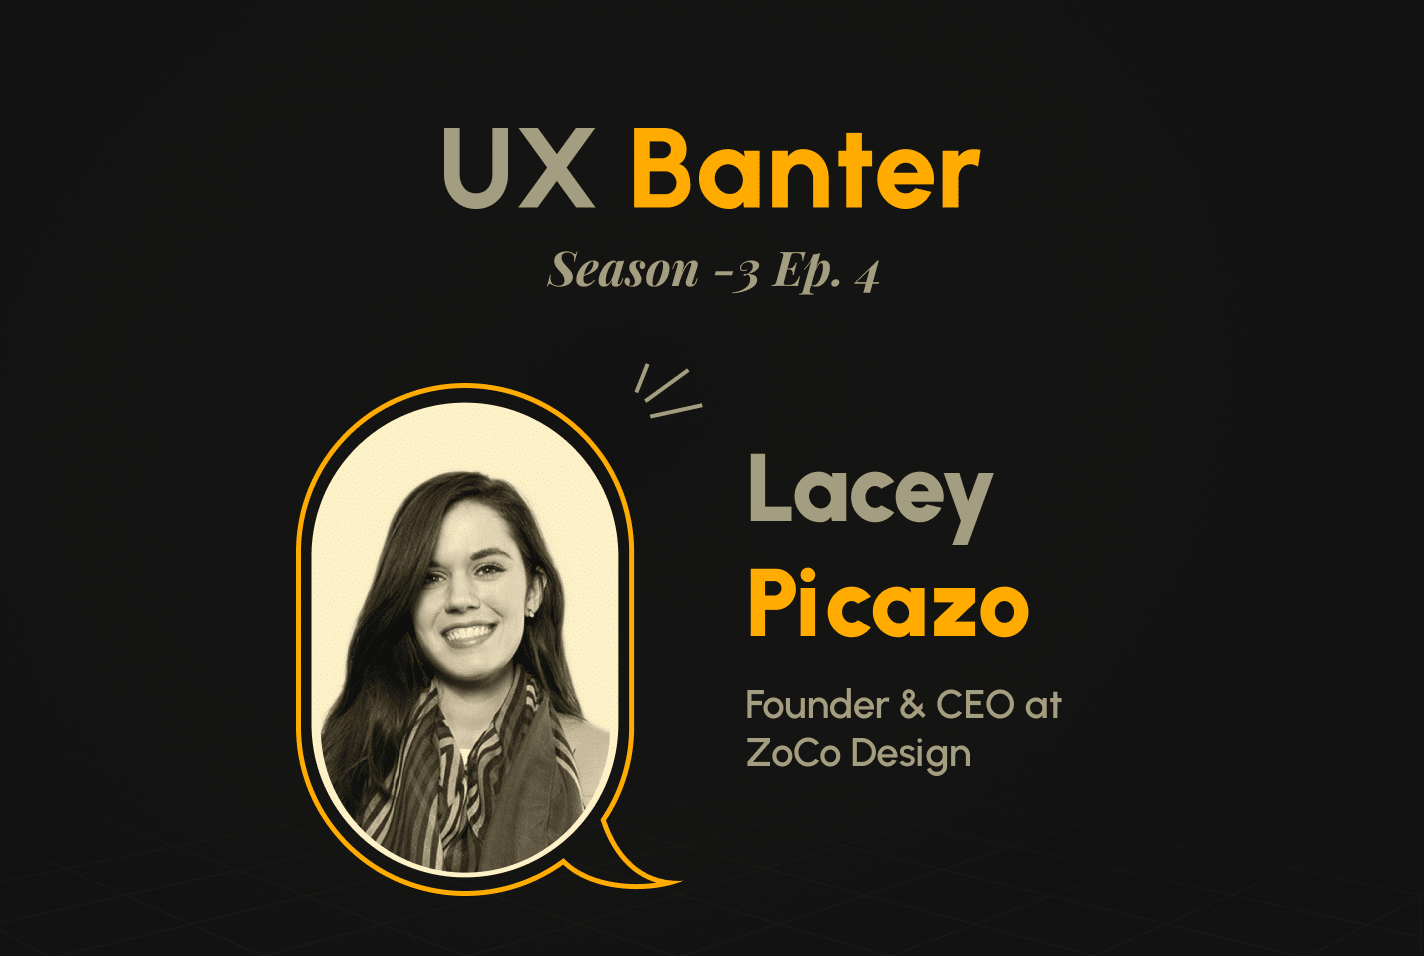 UX Banter Season 3: Episode 4 with Lacey Picazo